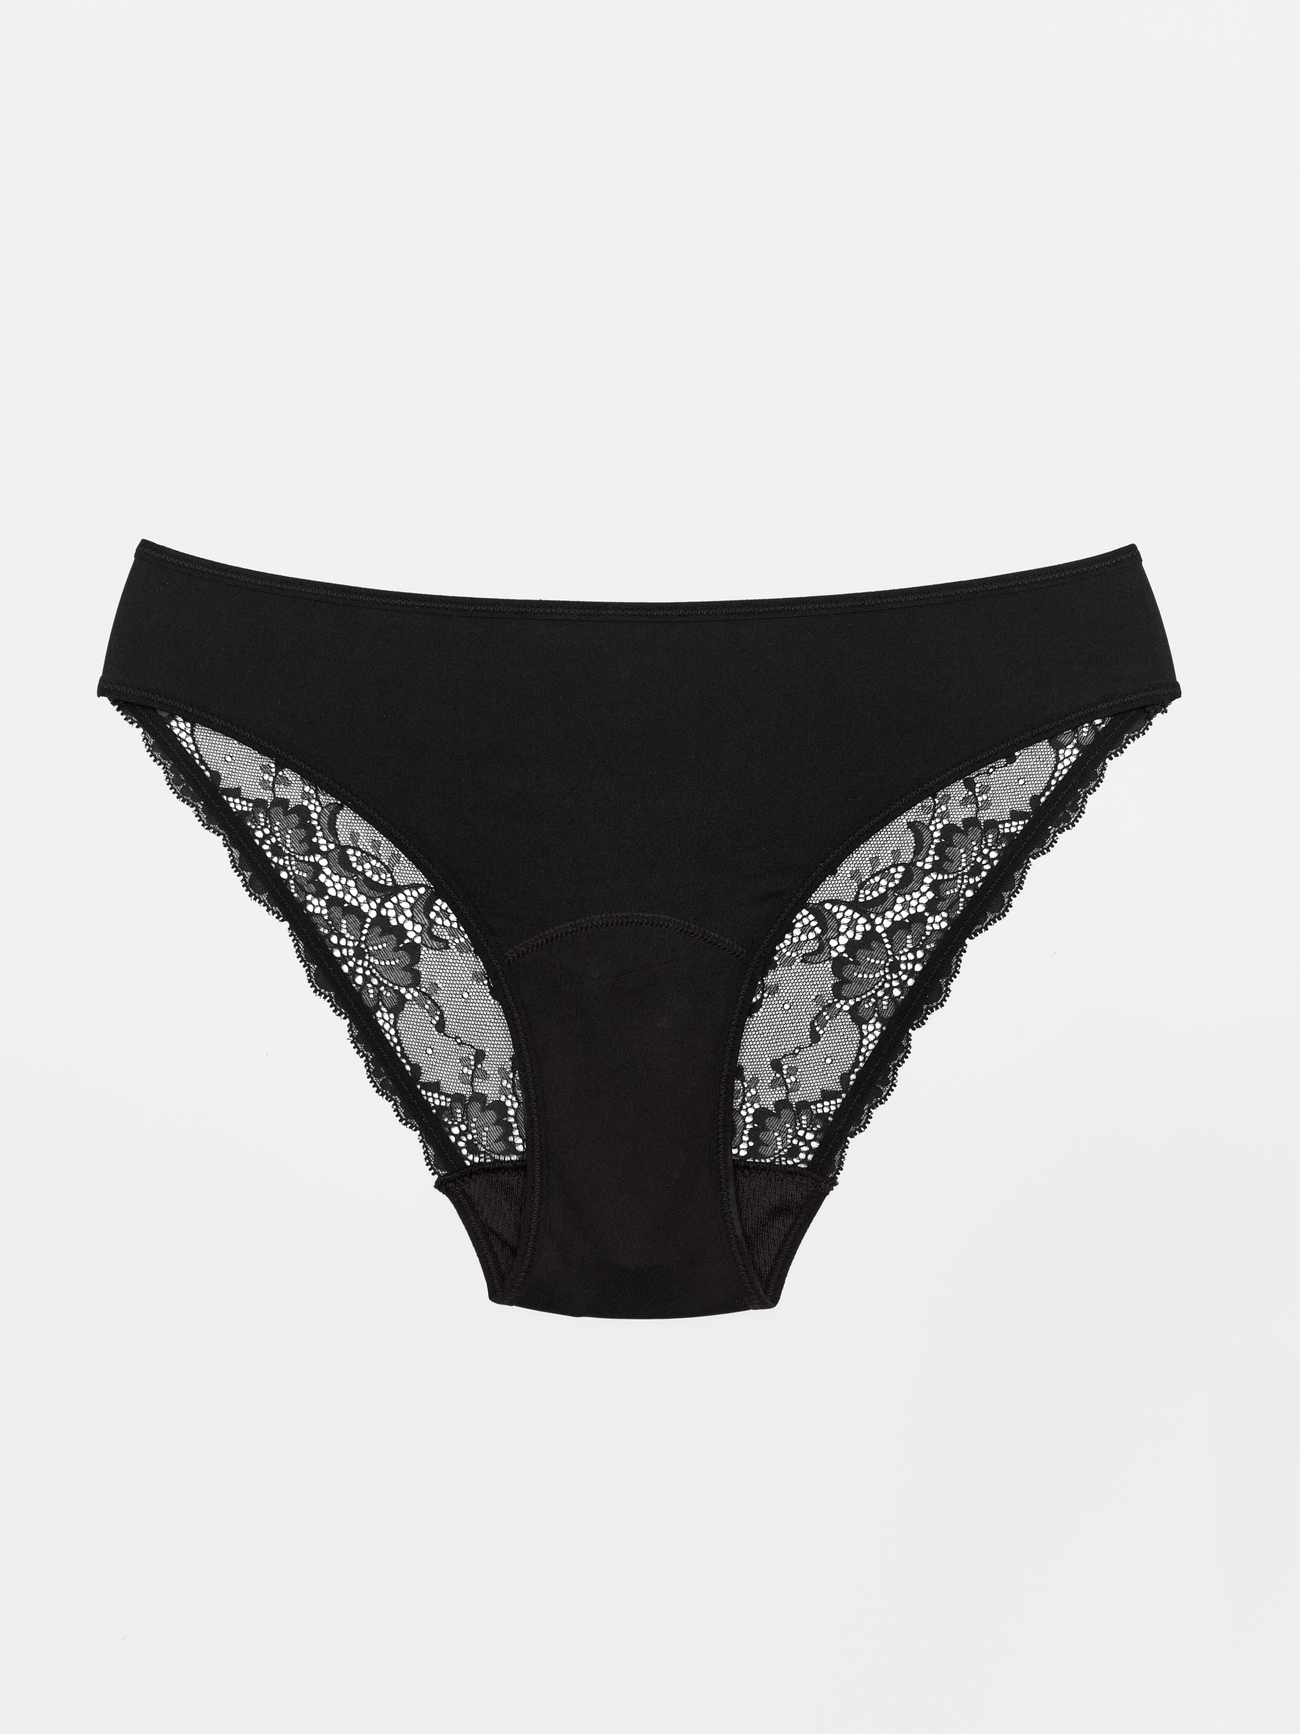 Lace Brief - Recycled Nylon - Black